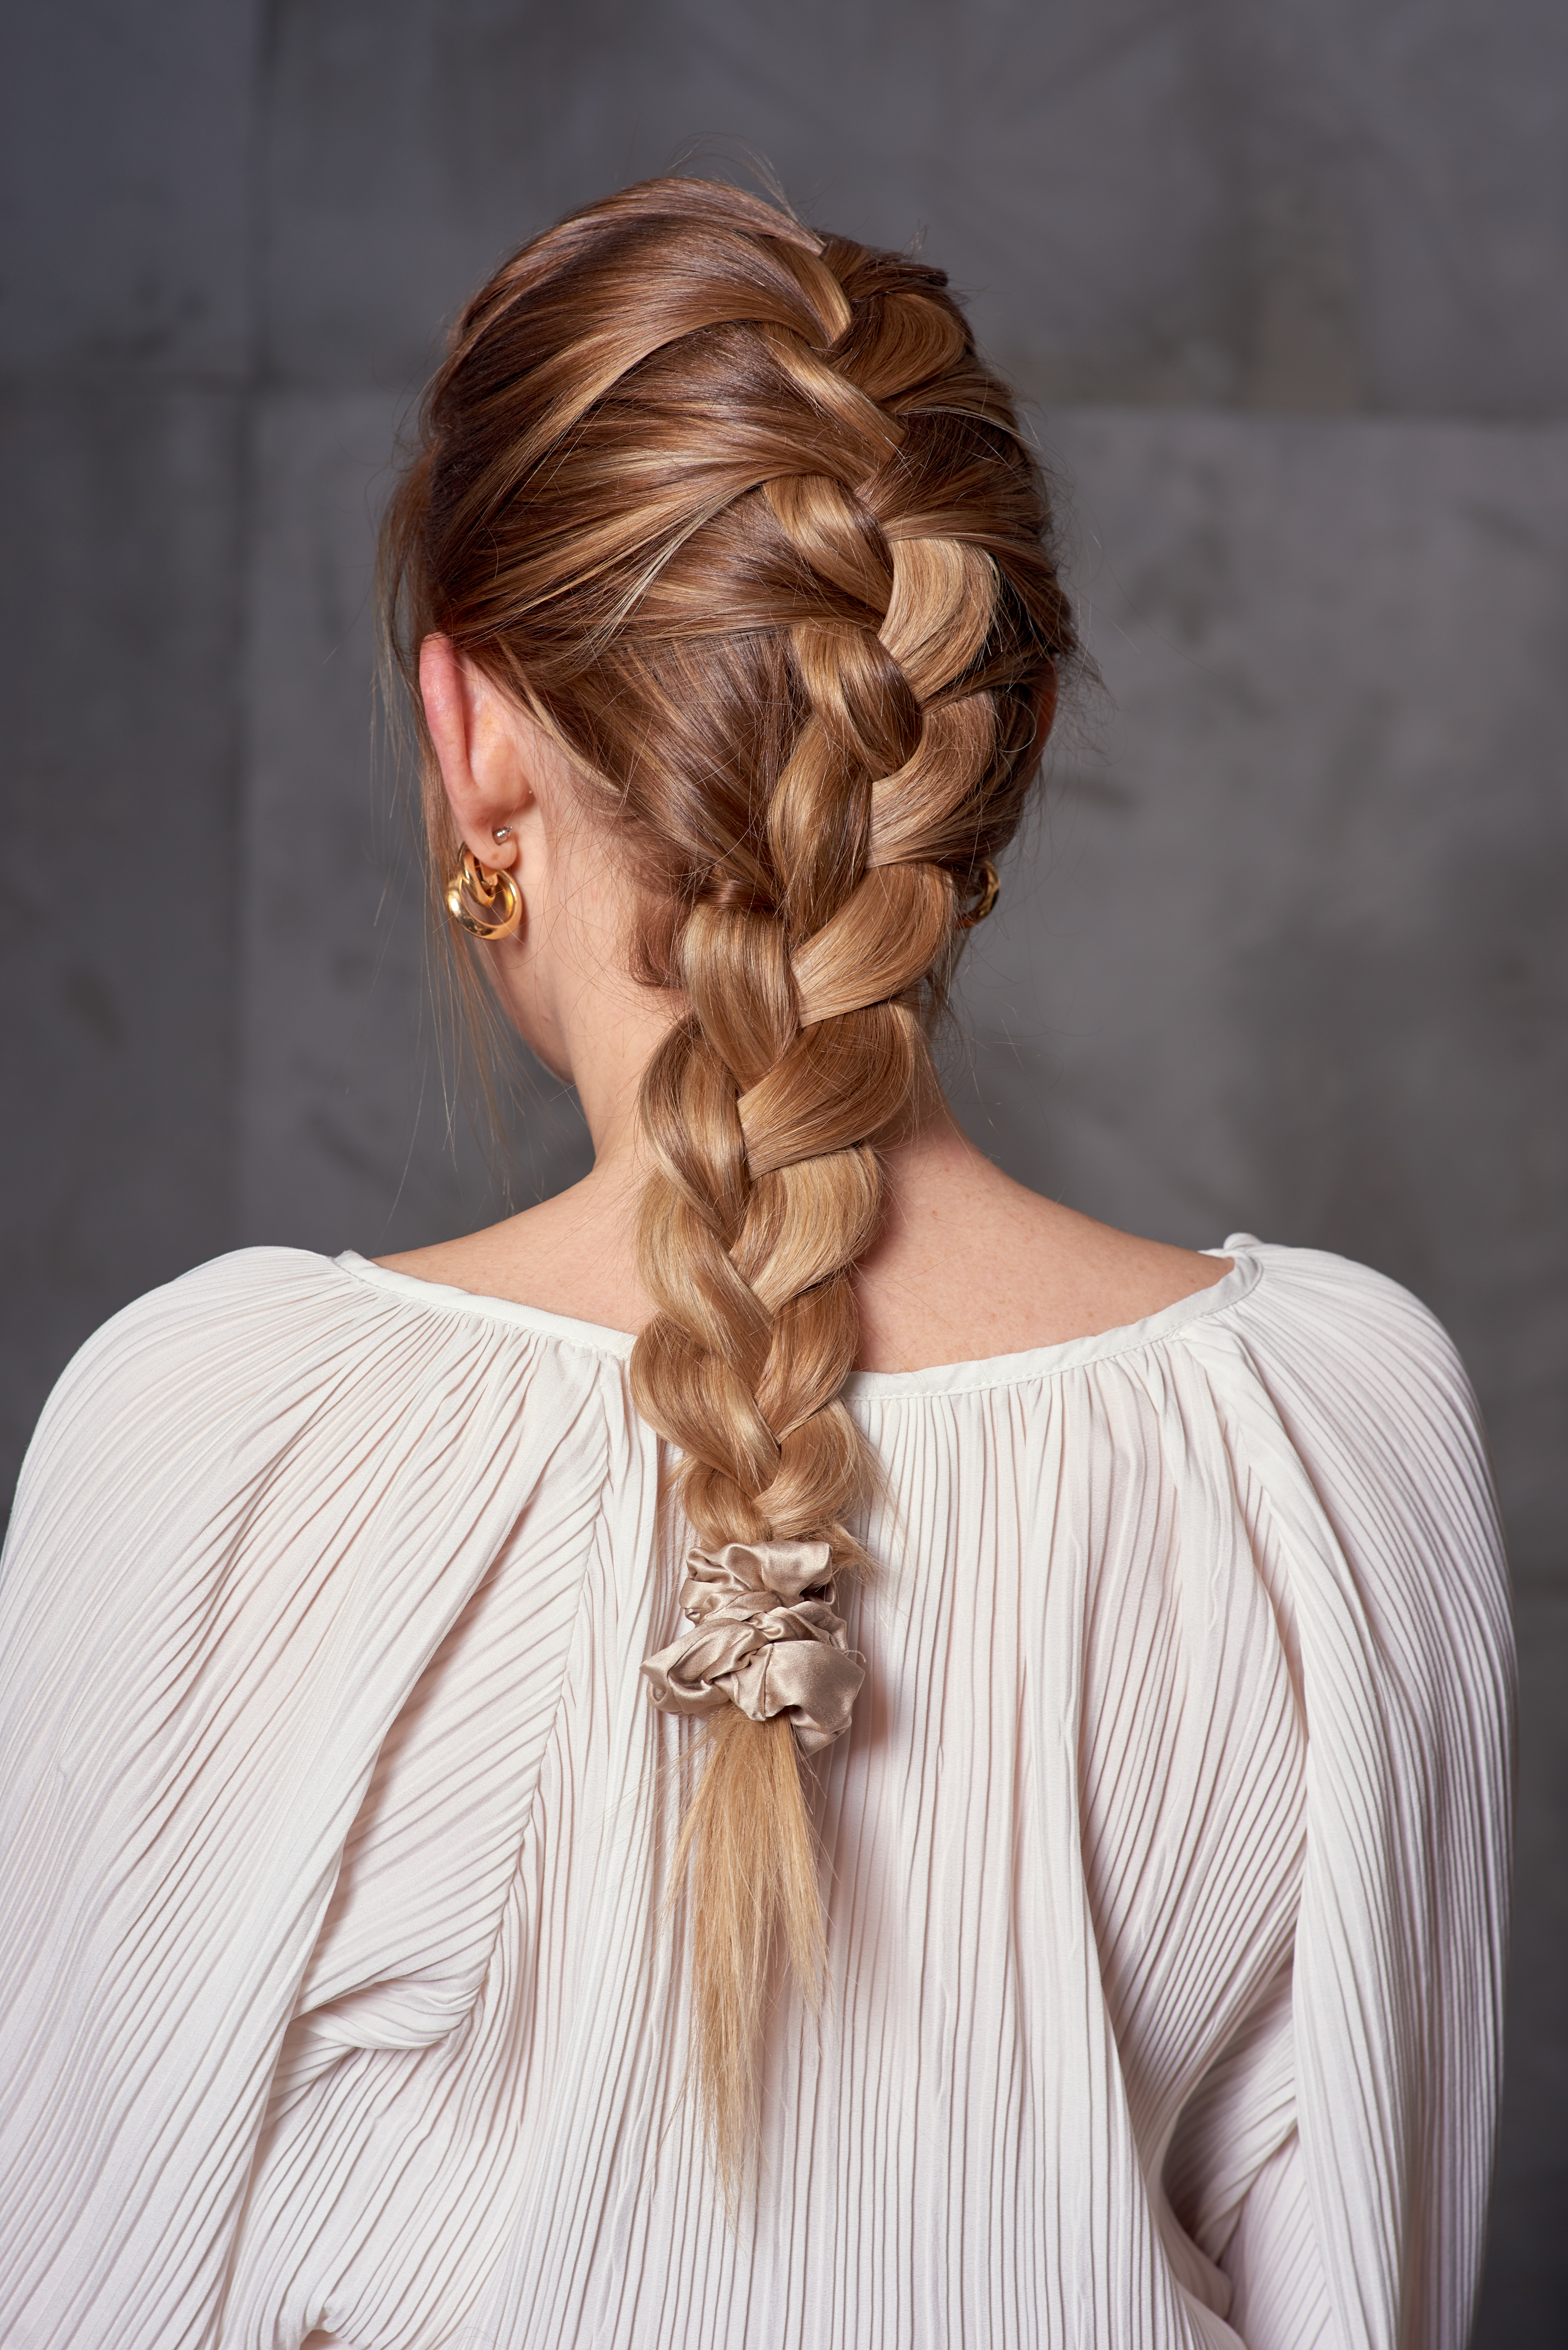 3 Types of French Braid with Step-by-Step Tutorials for Beginners